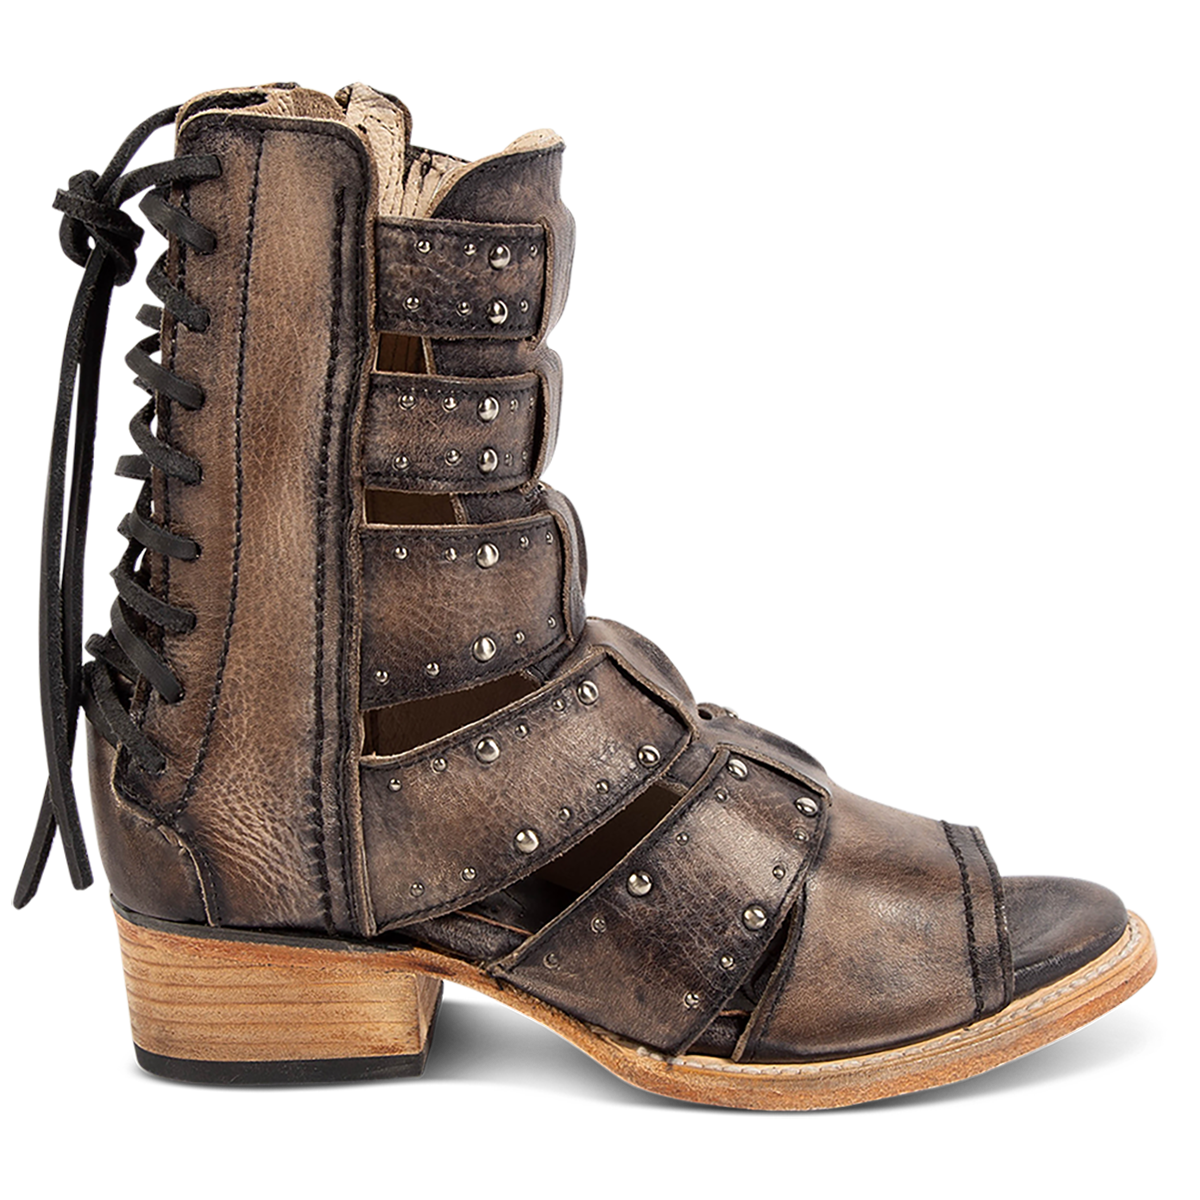 FREEBIRD women's Ghost black distressed leather sandal with an inside working brass zipper, back panel lacing and an exposed exterior